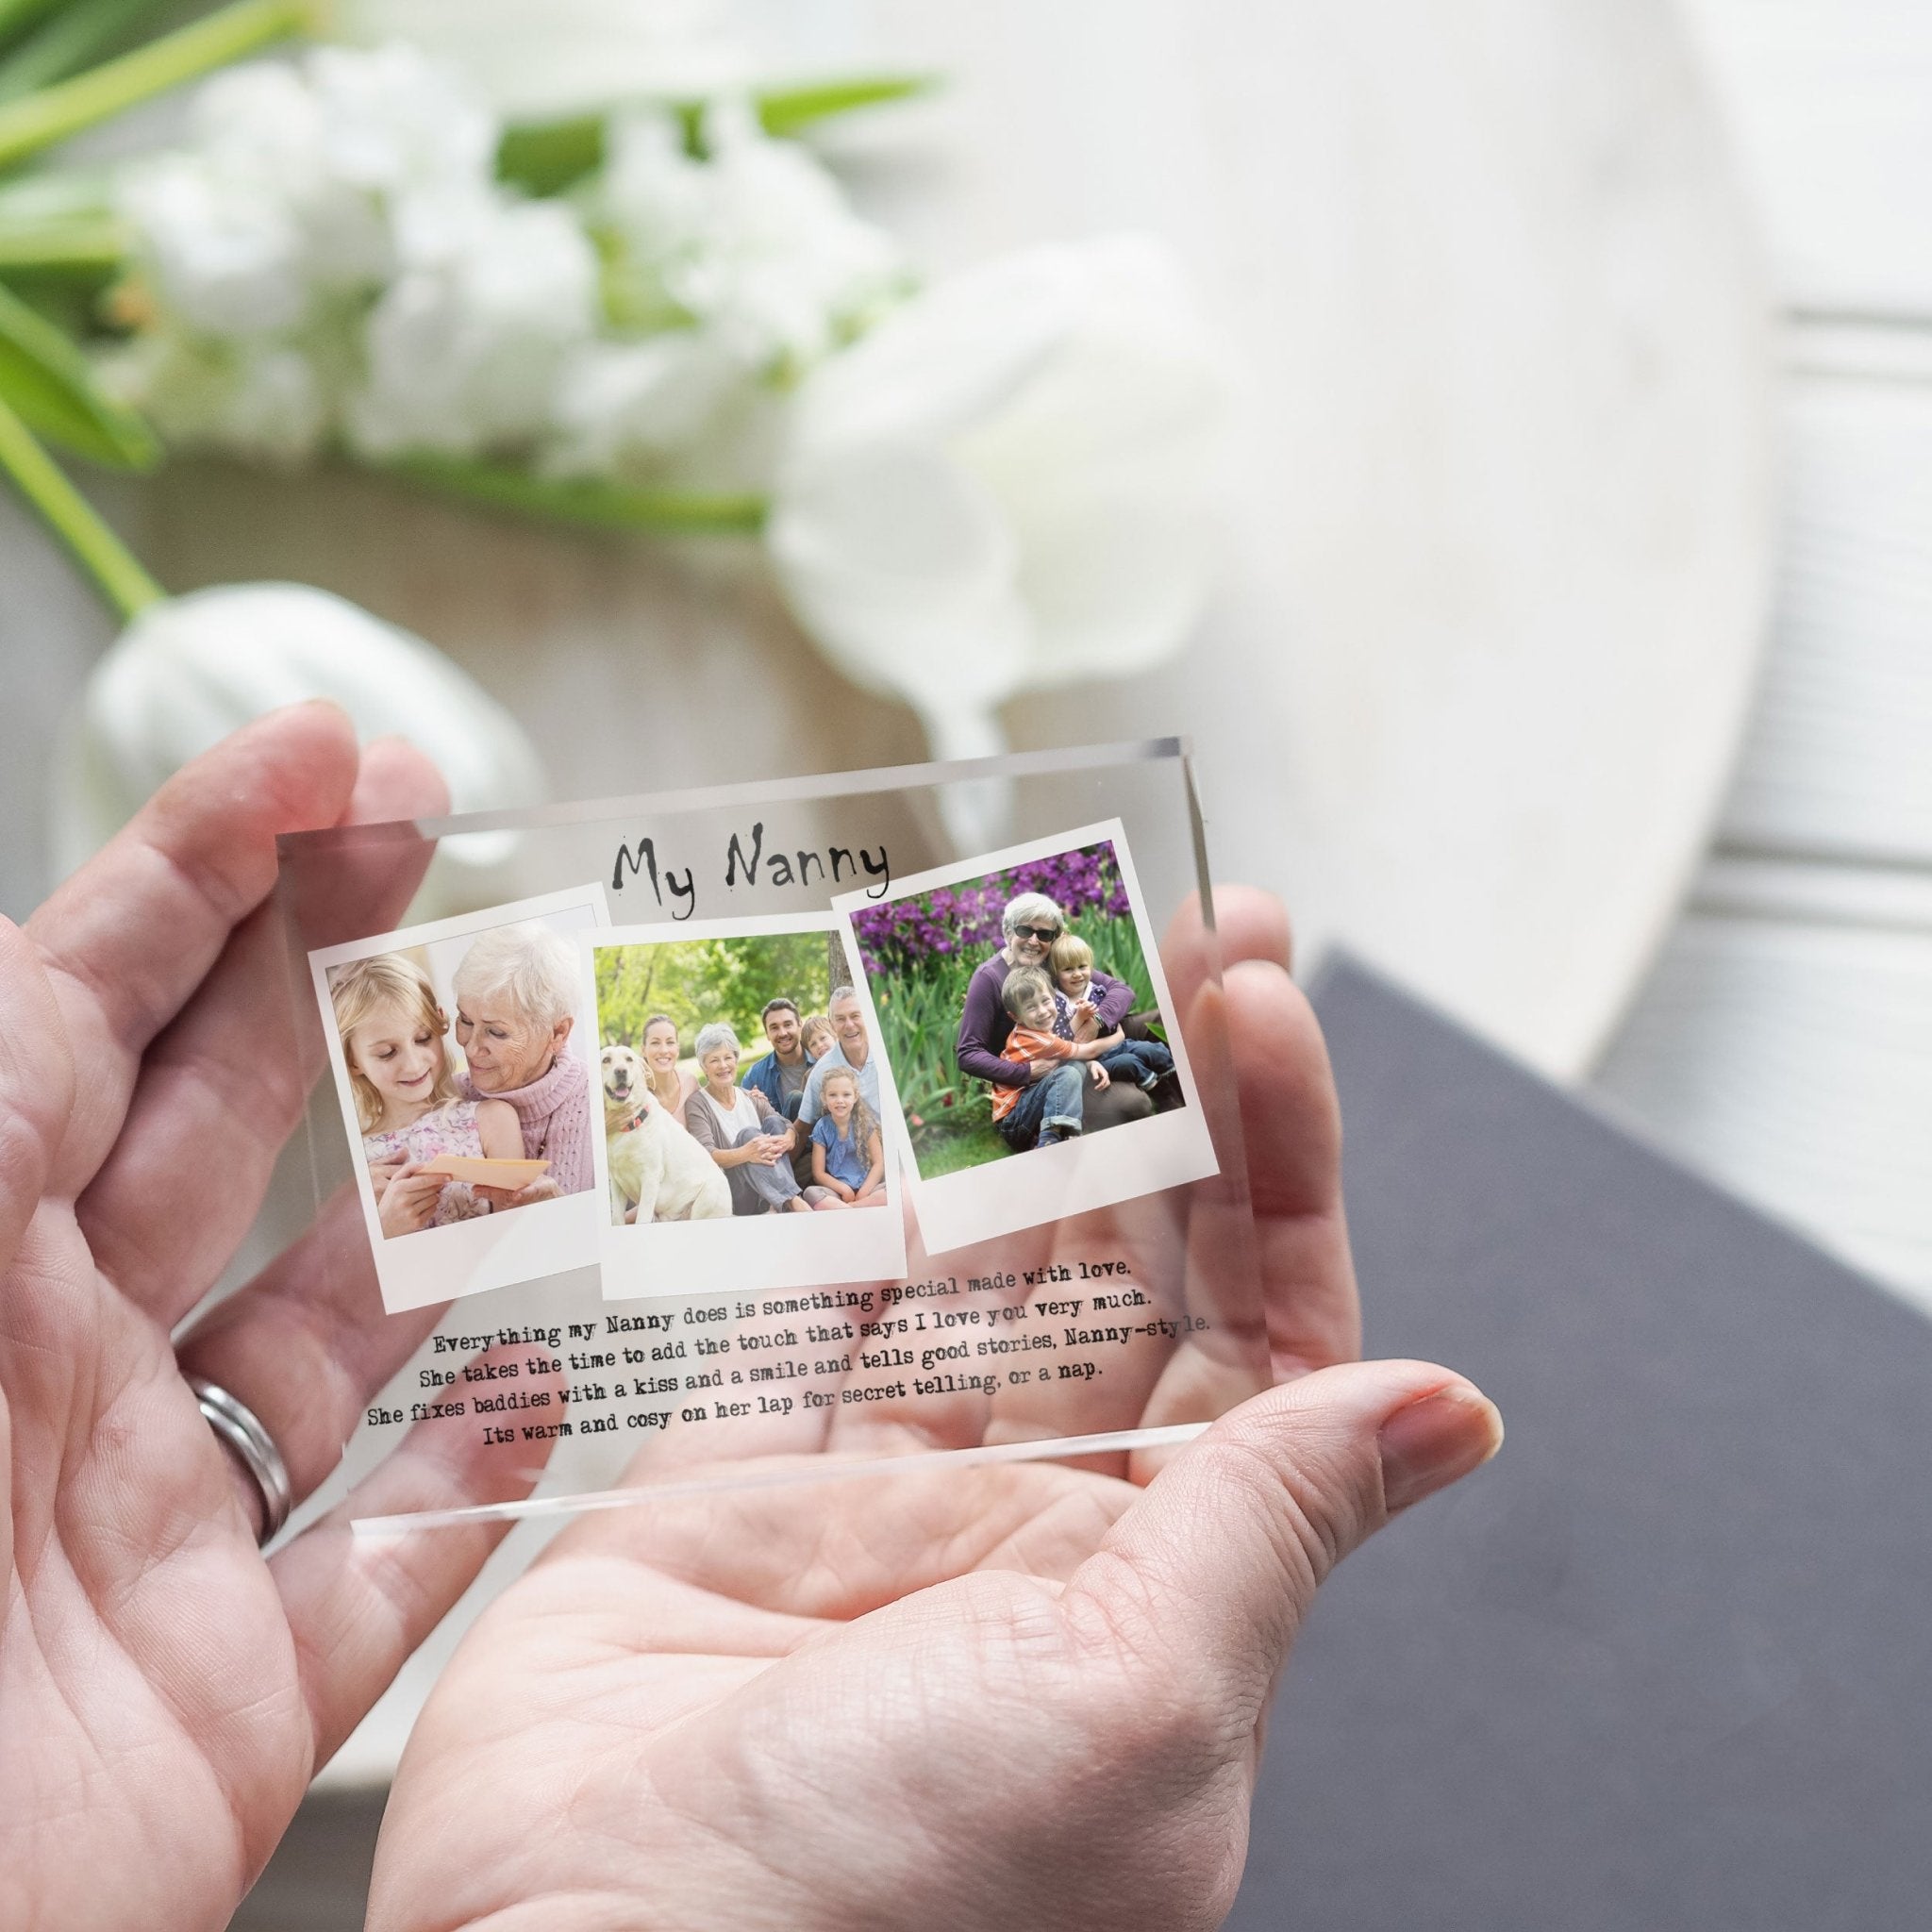 Personalised Nanny Gift | Nanny crystal clear glass | Nanny personalized photo | Nanny quotation | Nannie customized photo PhotoBlock - Unique Prints